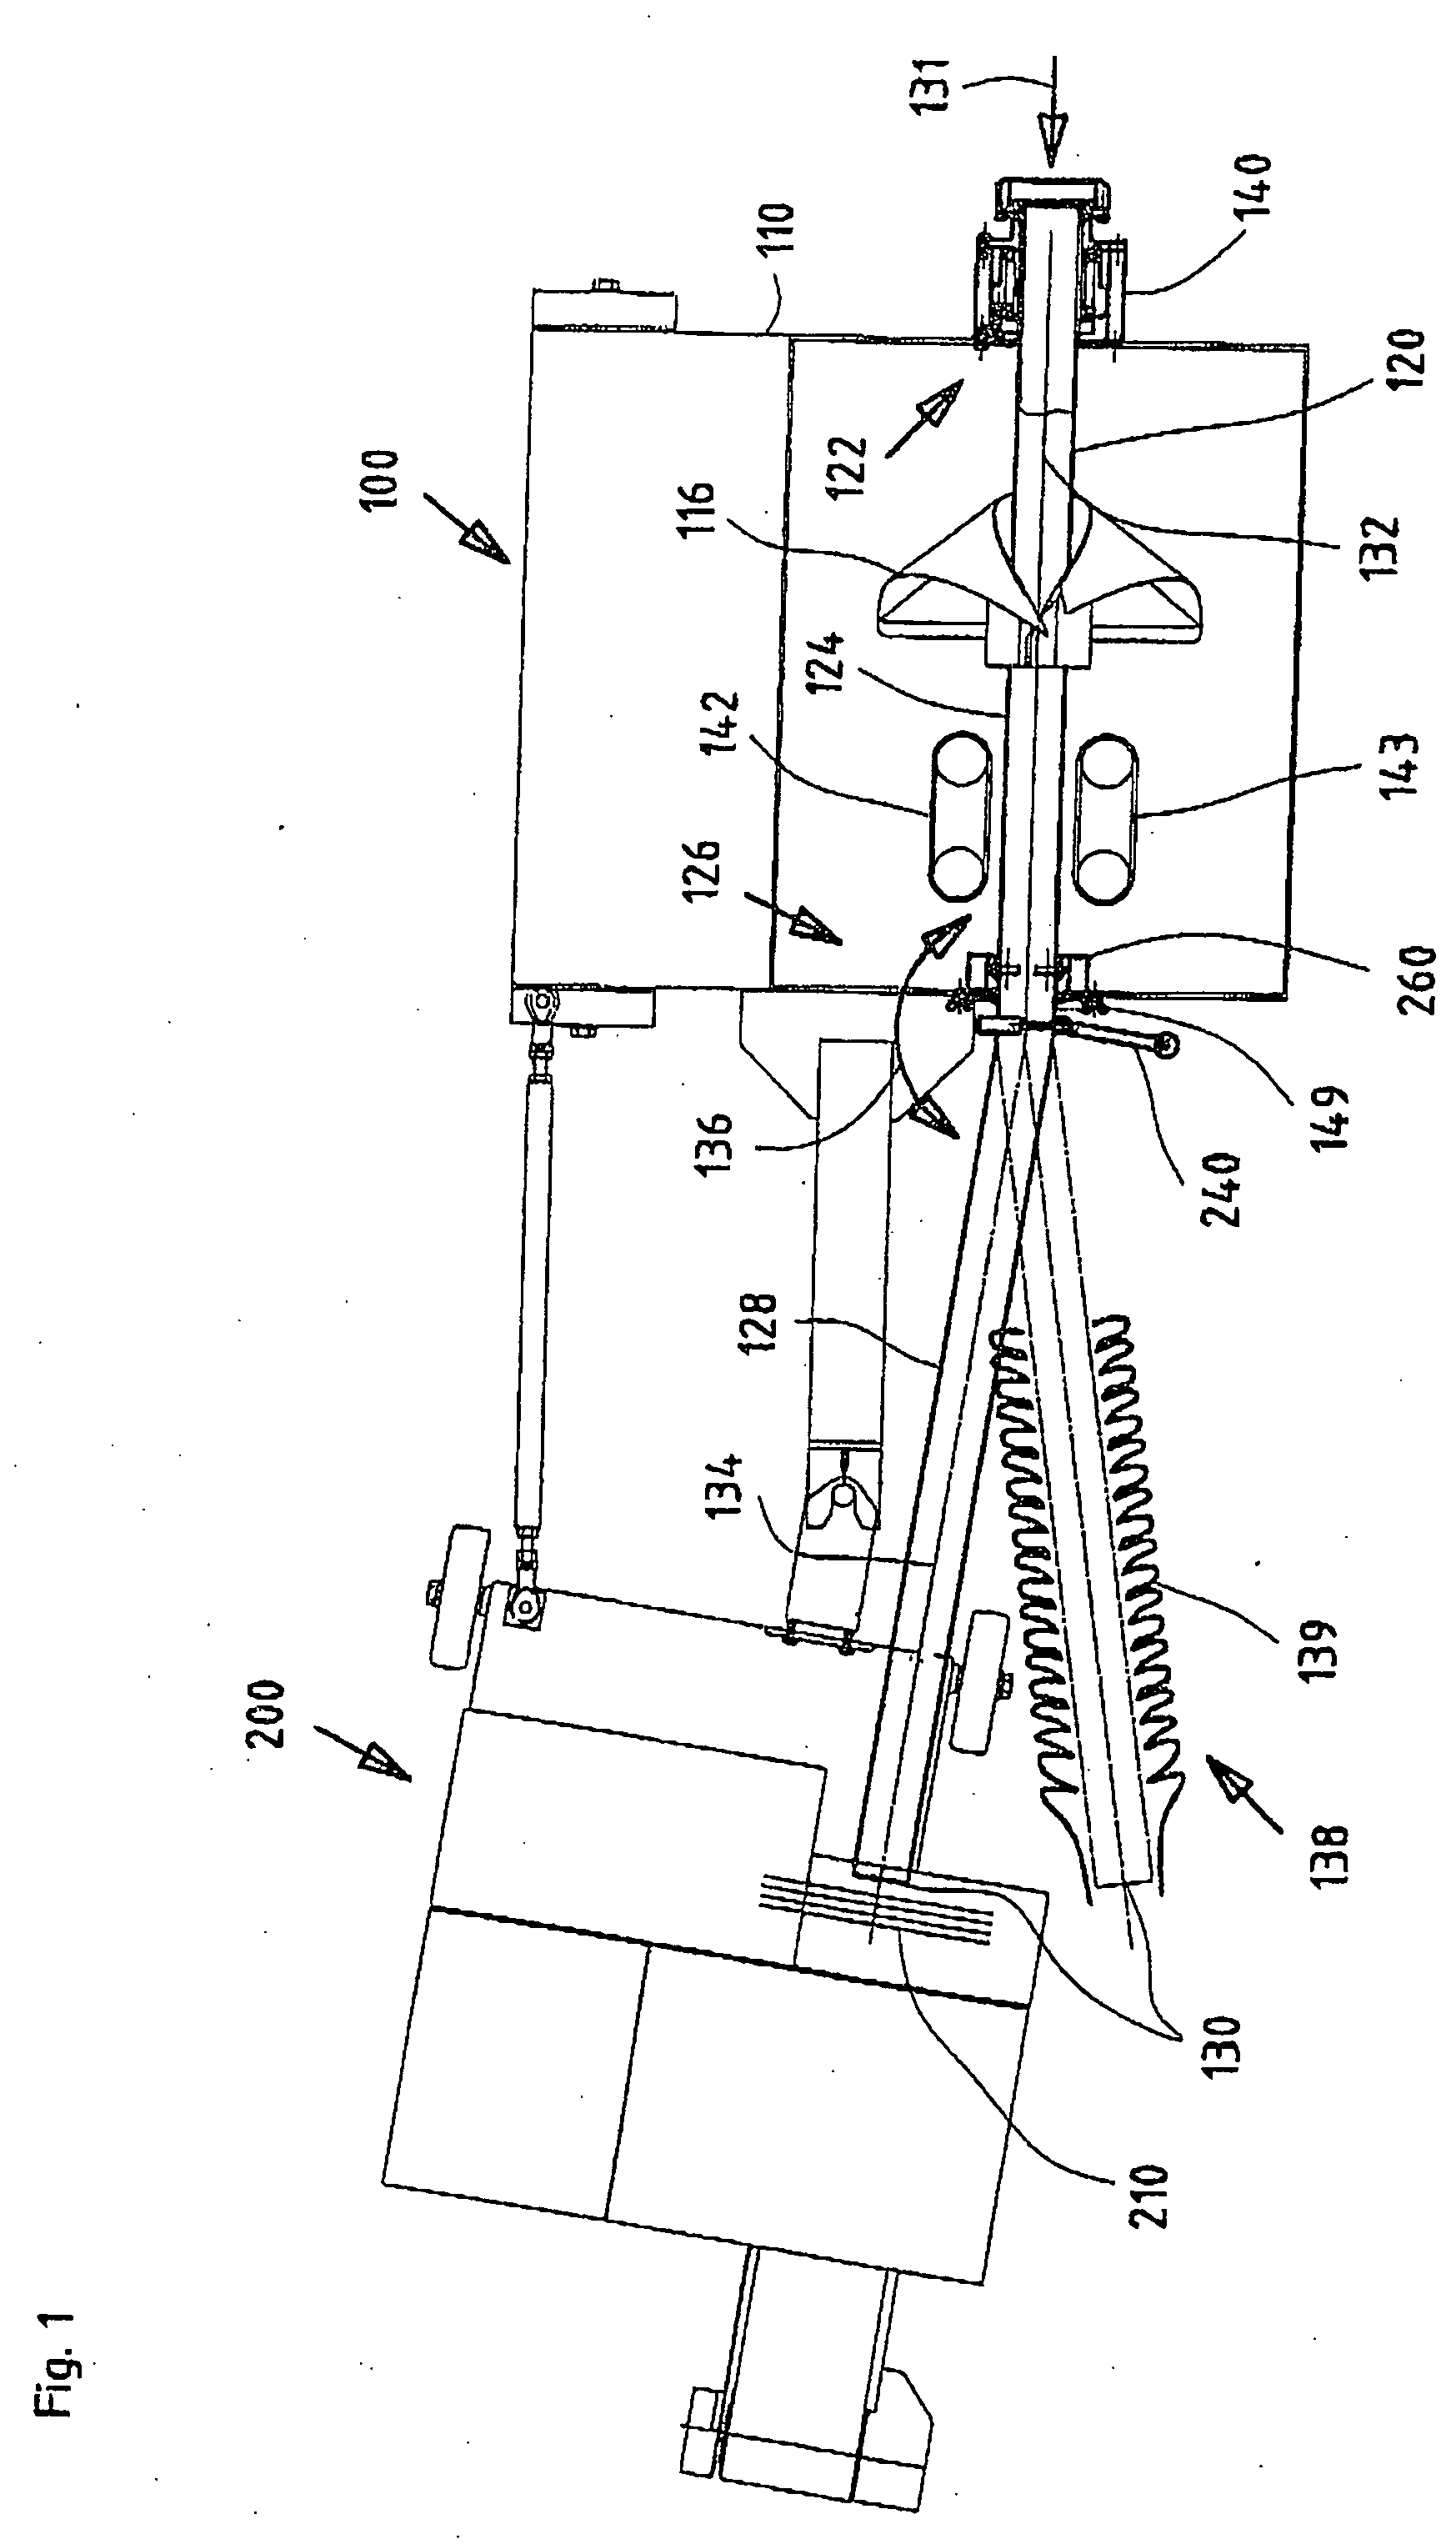 Packaging device for free-flowing bulk material (filling)